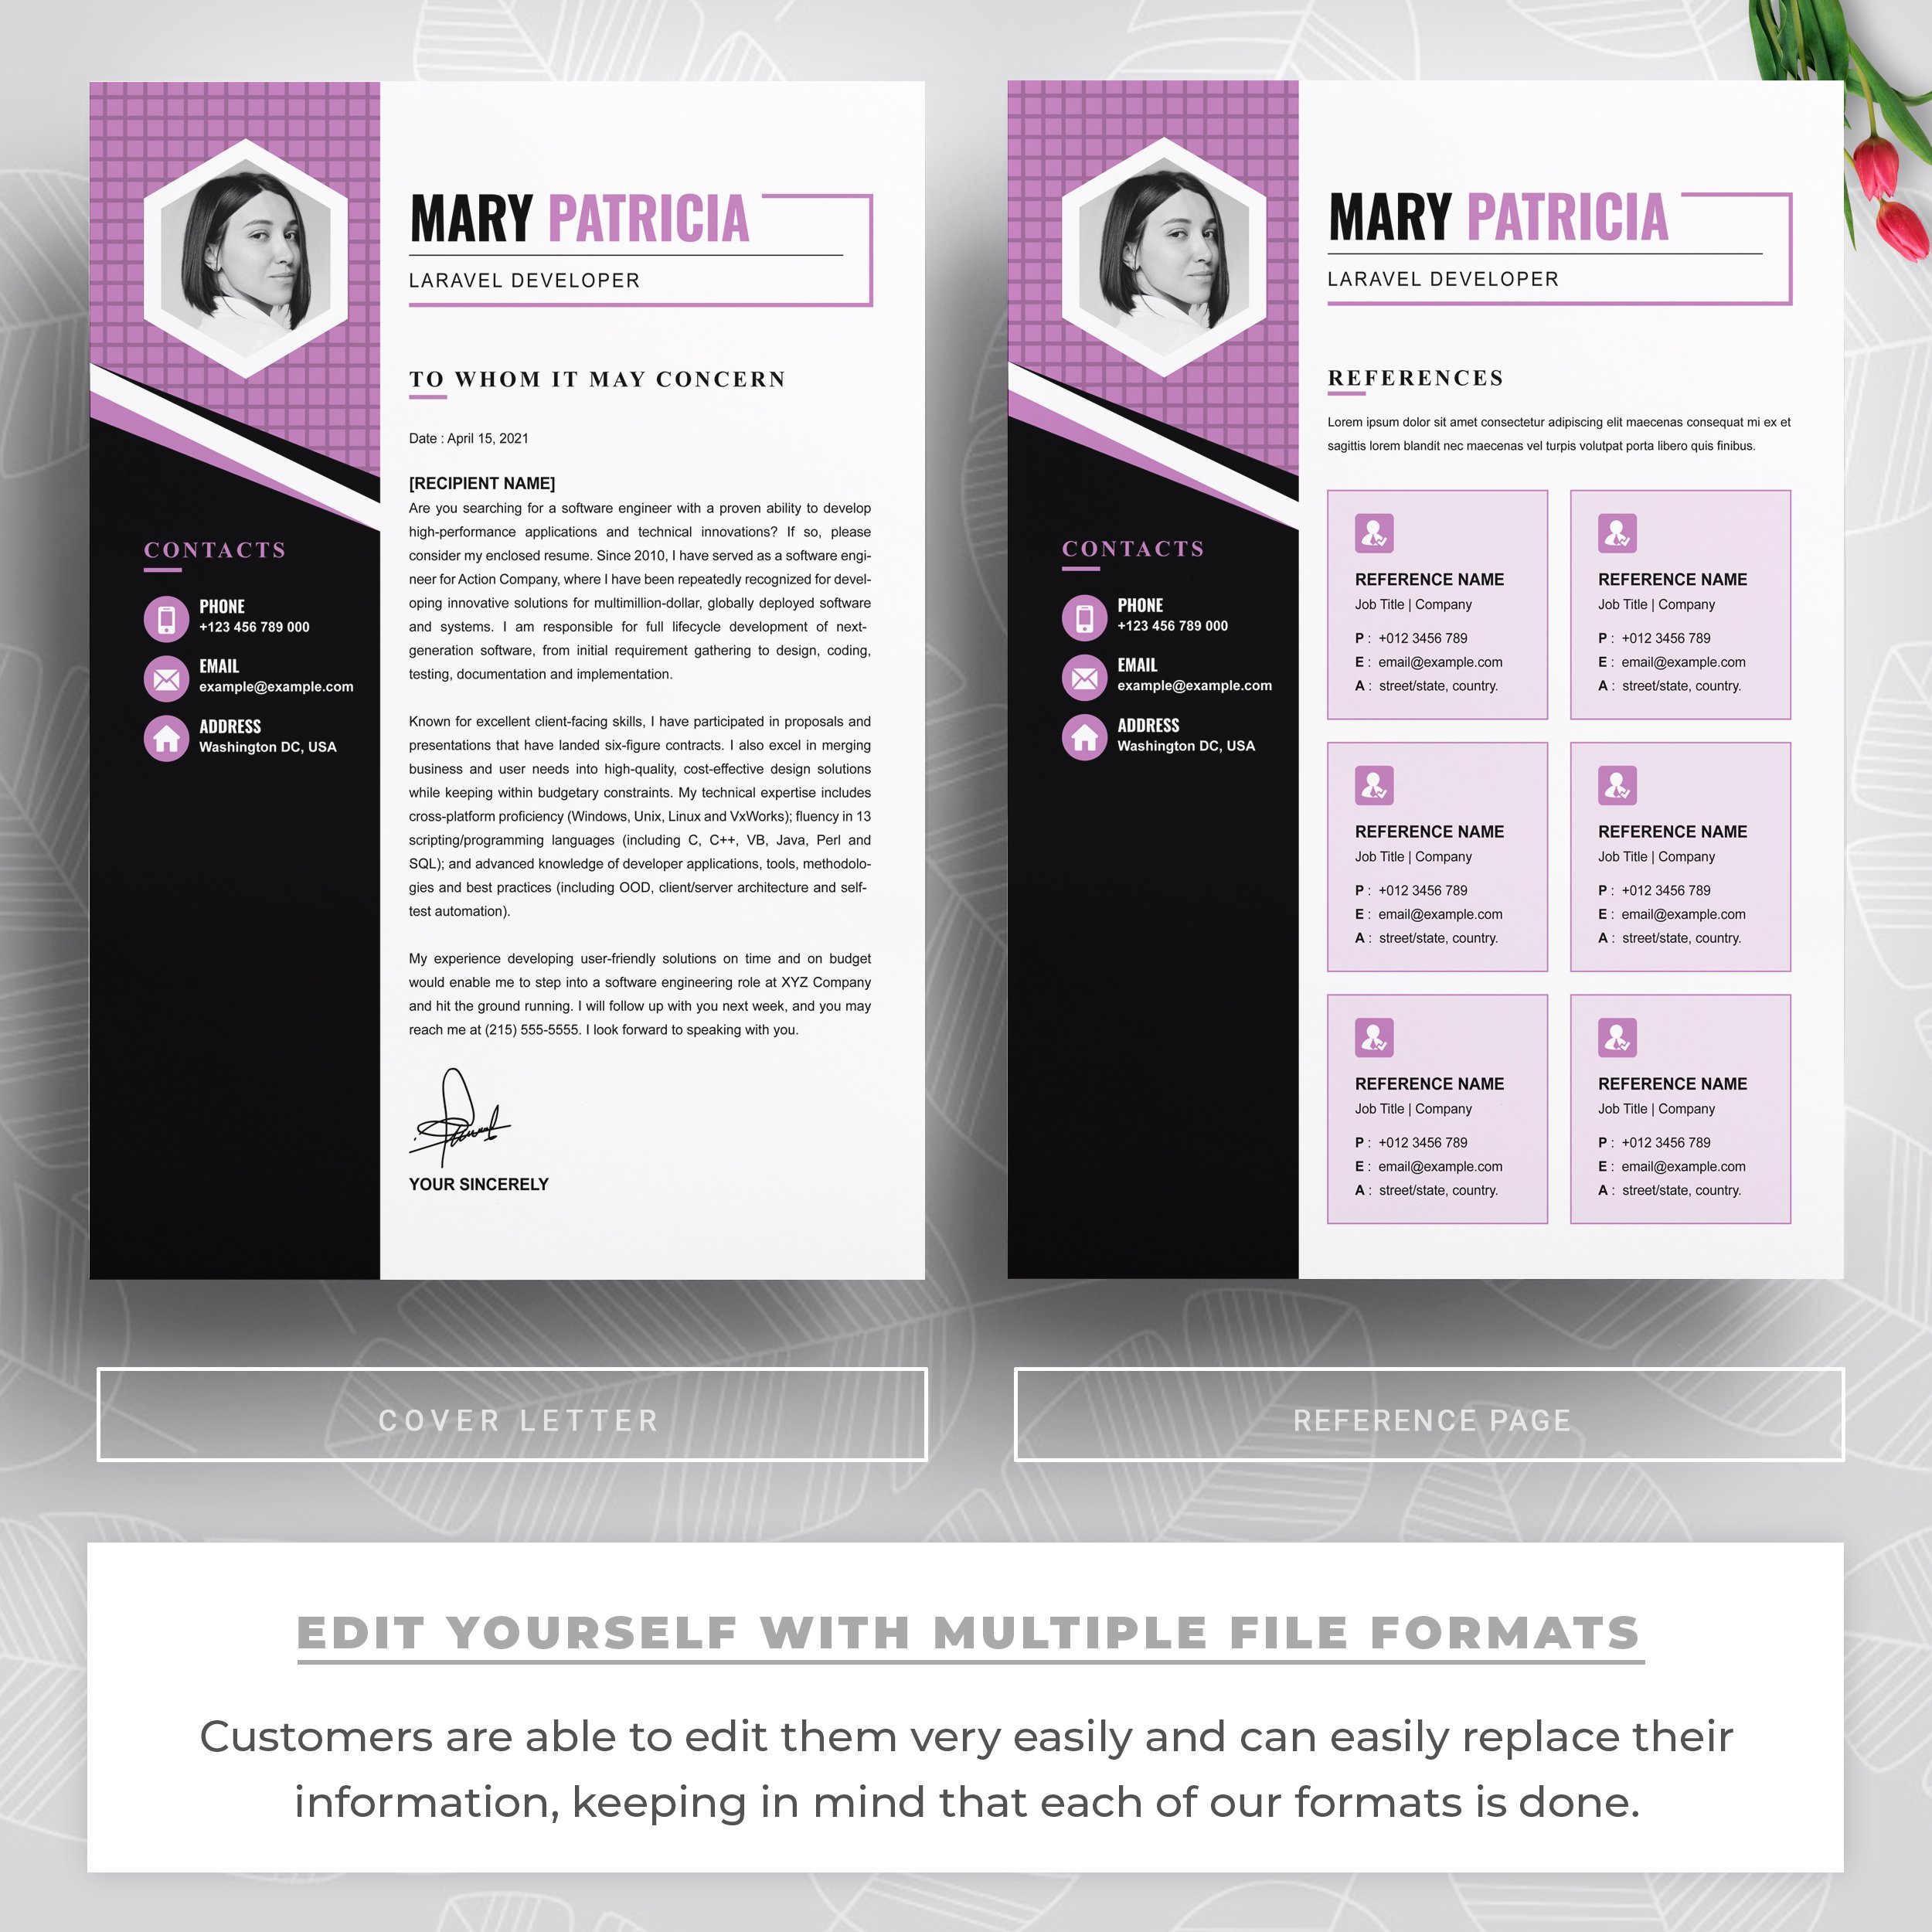 03 4 pages free resume design template resumeinventor 421